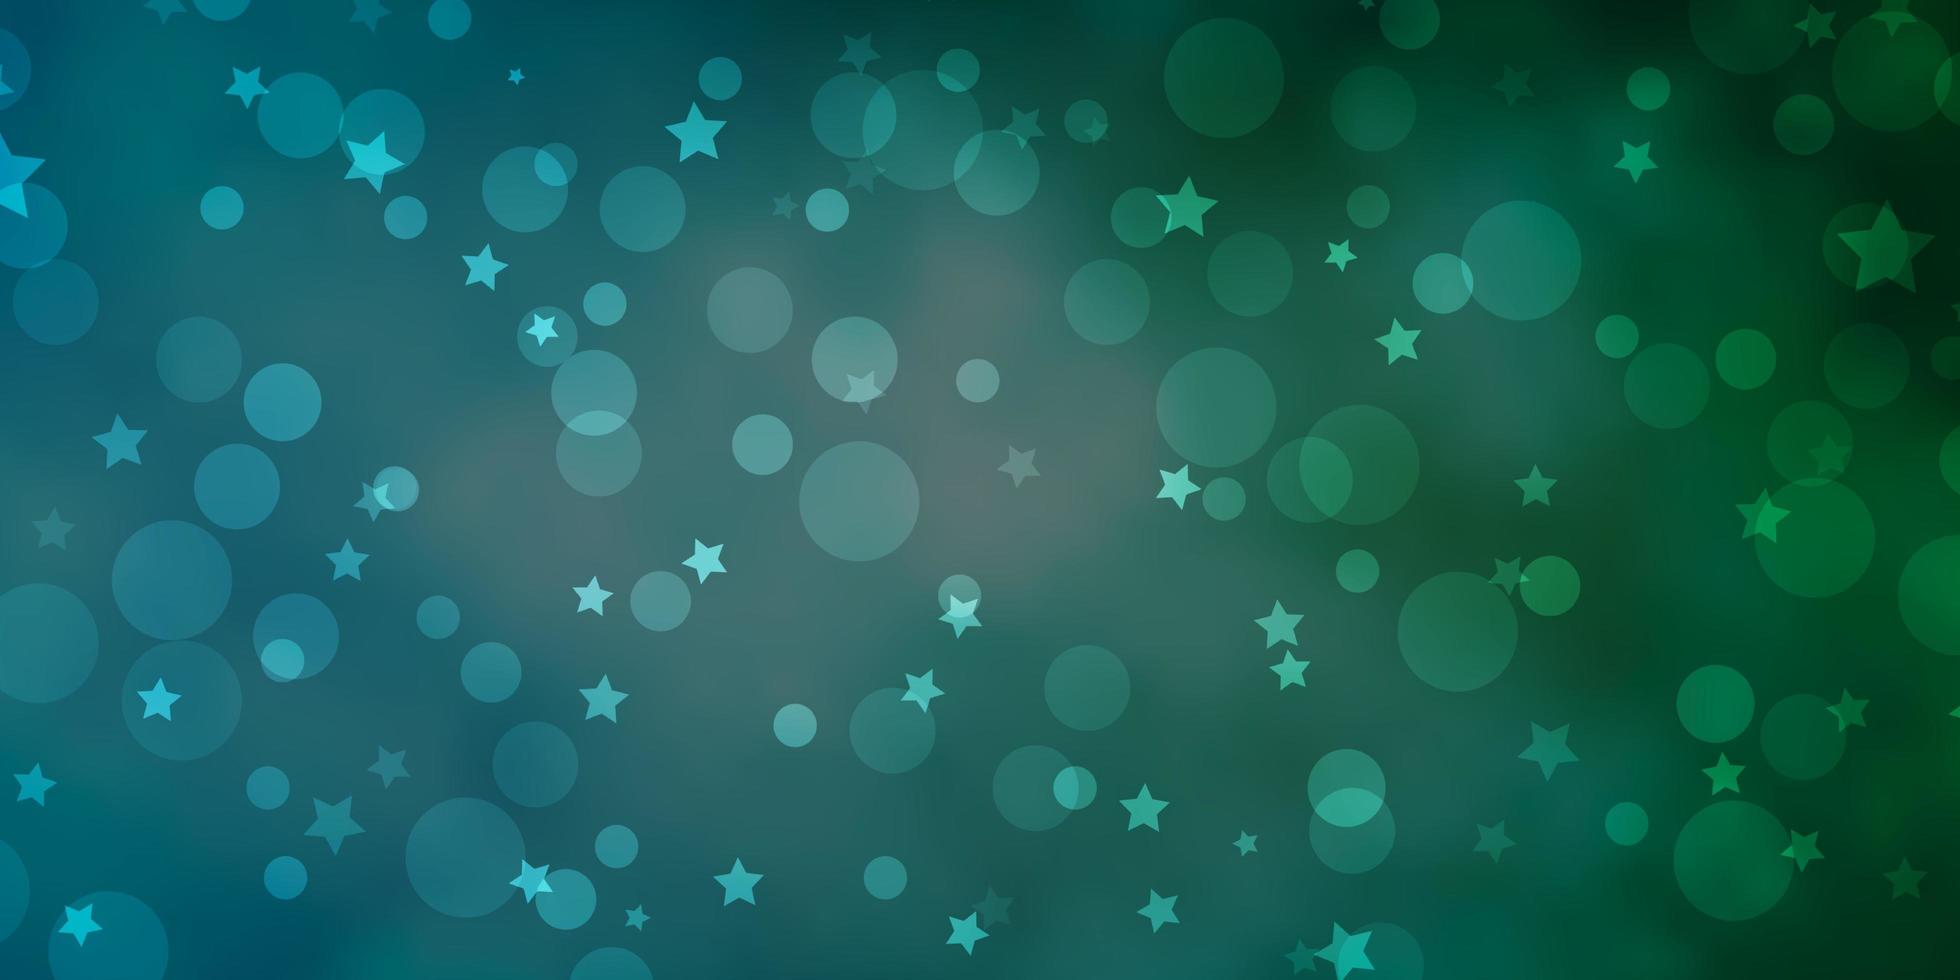 Light Blue Green vector background with circles stars Abstract illustration with colorful shapes of circles stars Design for wallpaper fabric makers